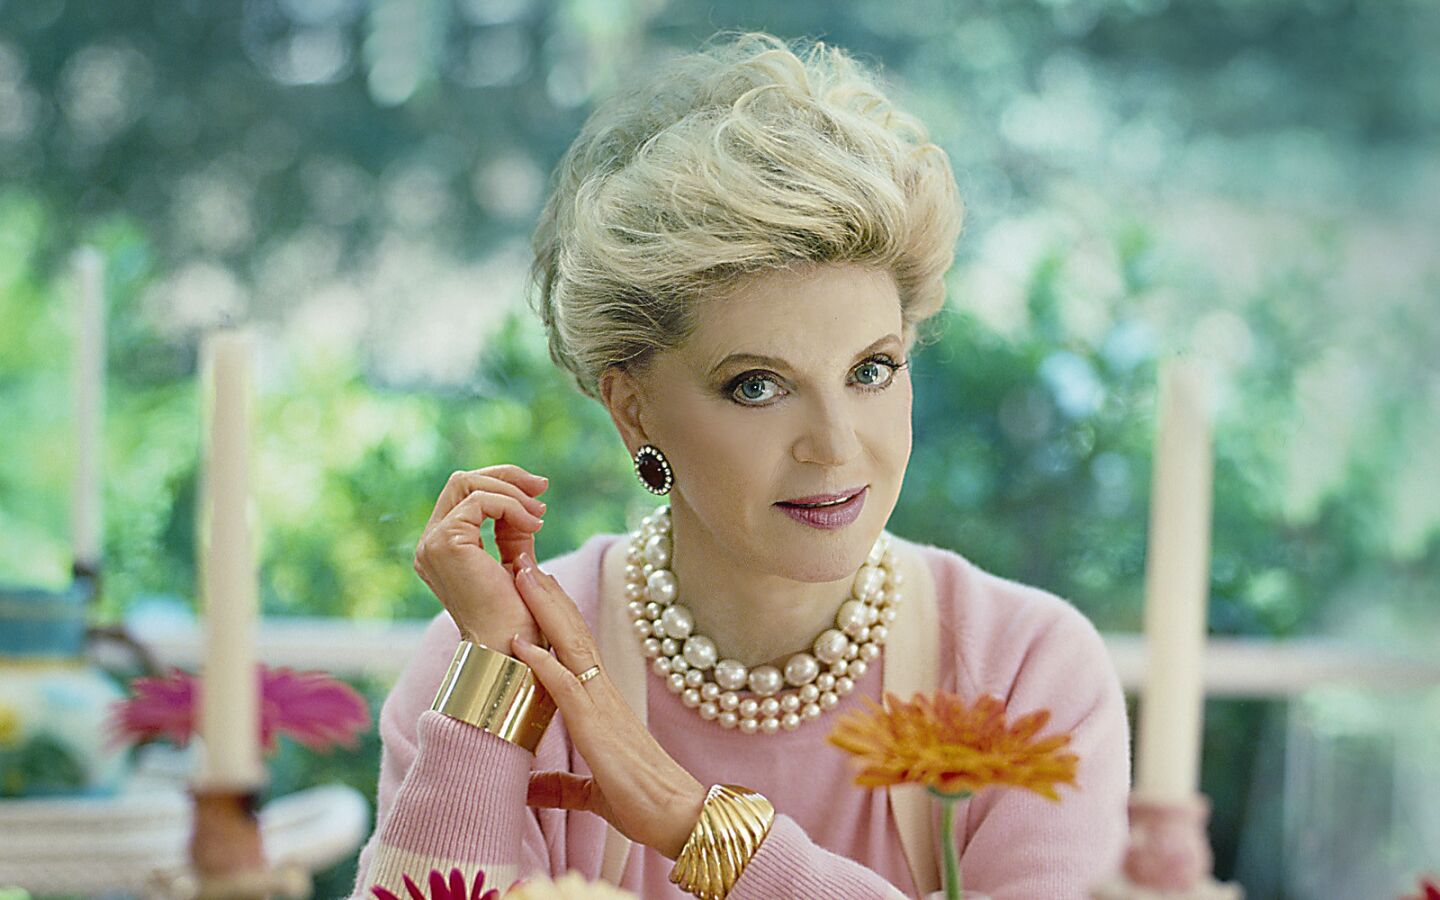 Judith Krantz wrote blockbuster romance novels including “Scruples” and “Princess Daisy” that sold more than 80 million copies worldwide. Her books have been translated into more than 50 languages, and seven have been adapted as TV miniseries, with her late husband, Steve Krantz, serving as executive producer for most. She was 91.